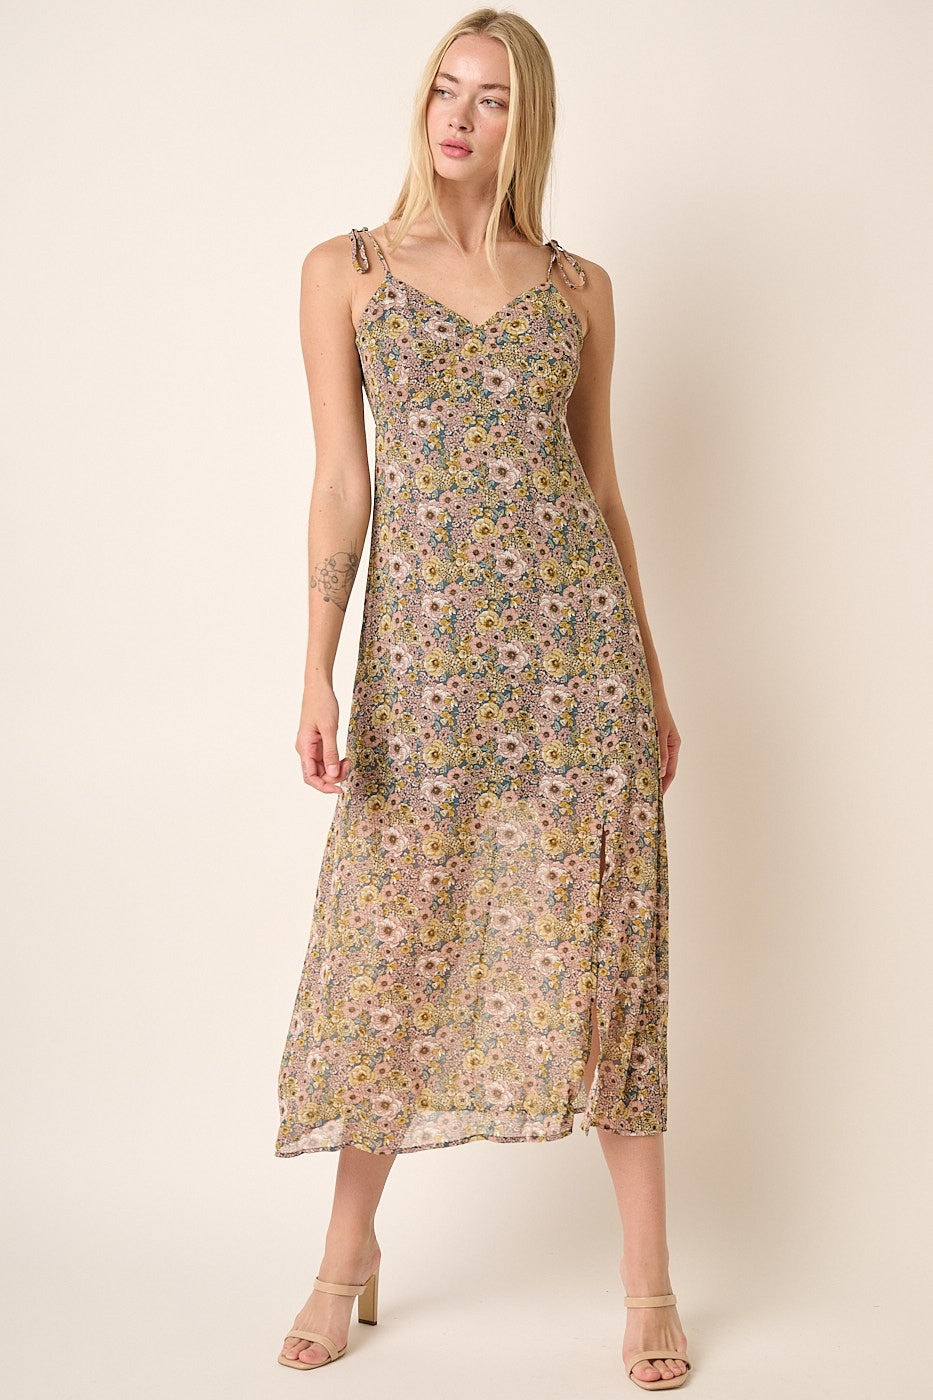 Give Me Flowers Maxi Dress